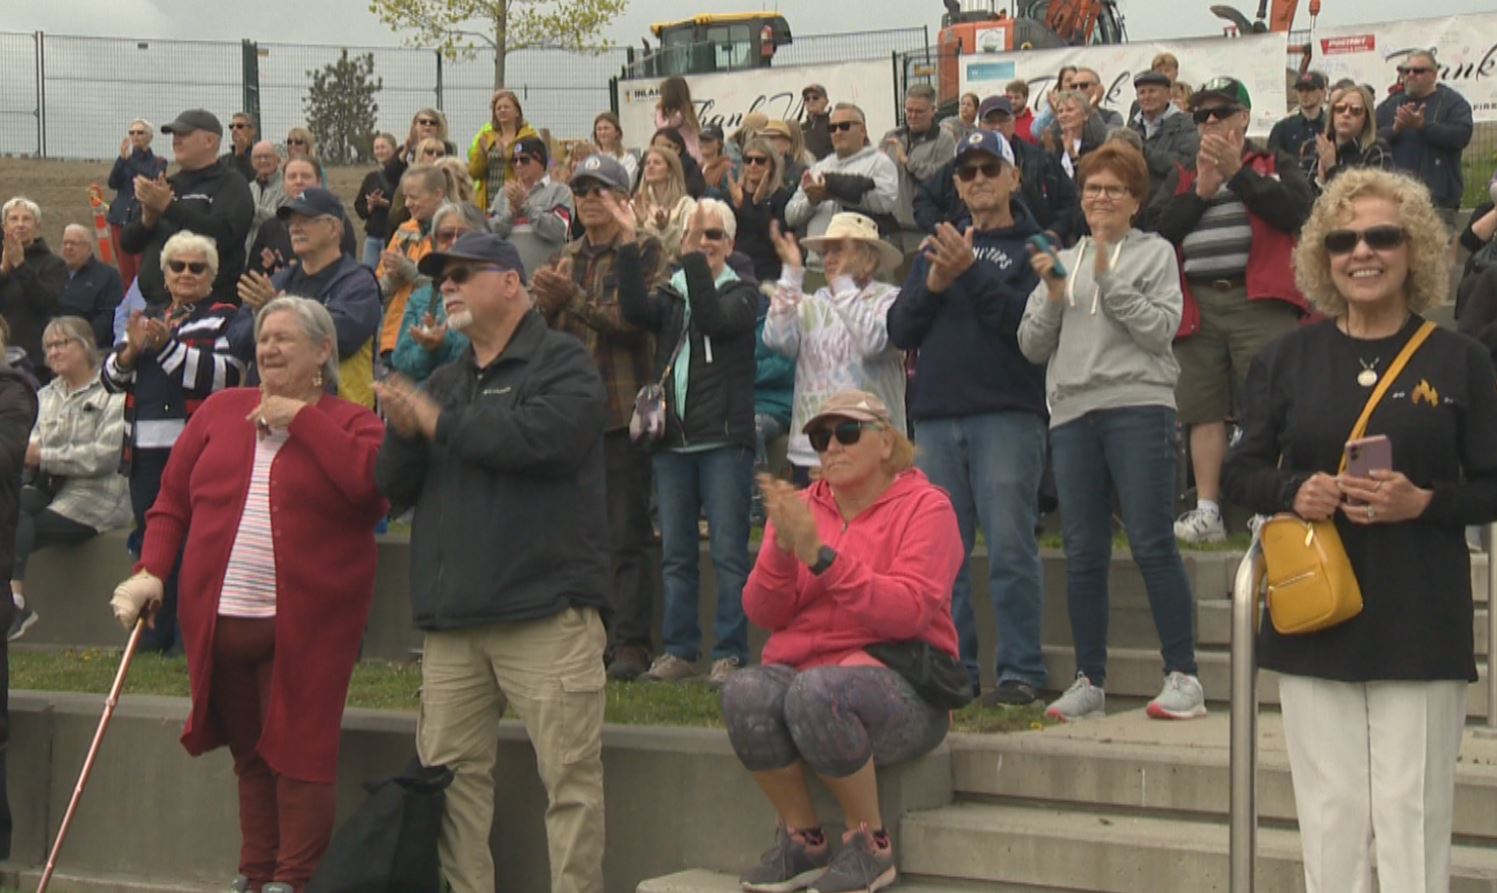 Heroes’ welcome as firefighters, support crews thanked for battling
McDougall Creek wildfire